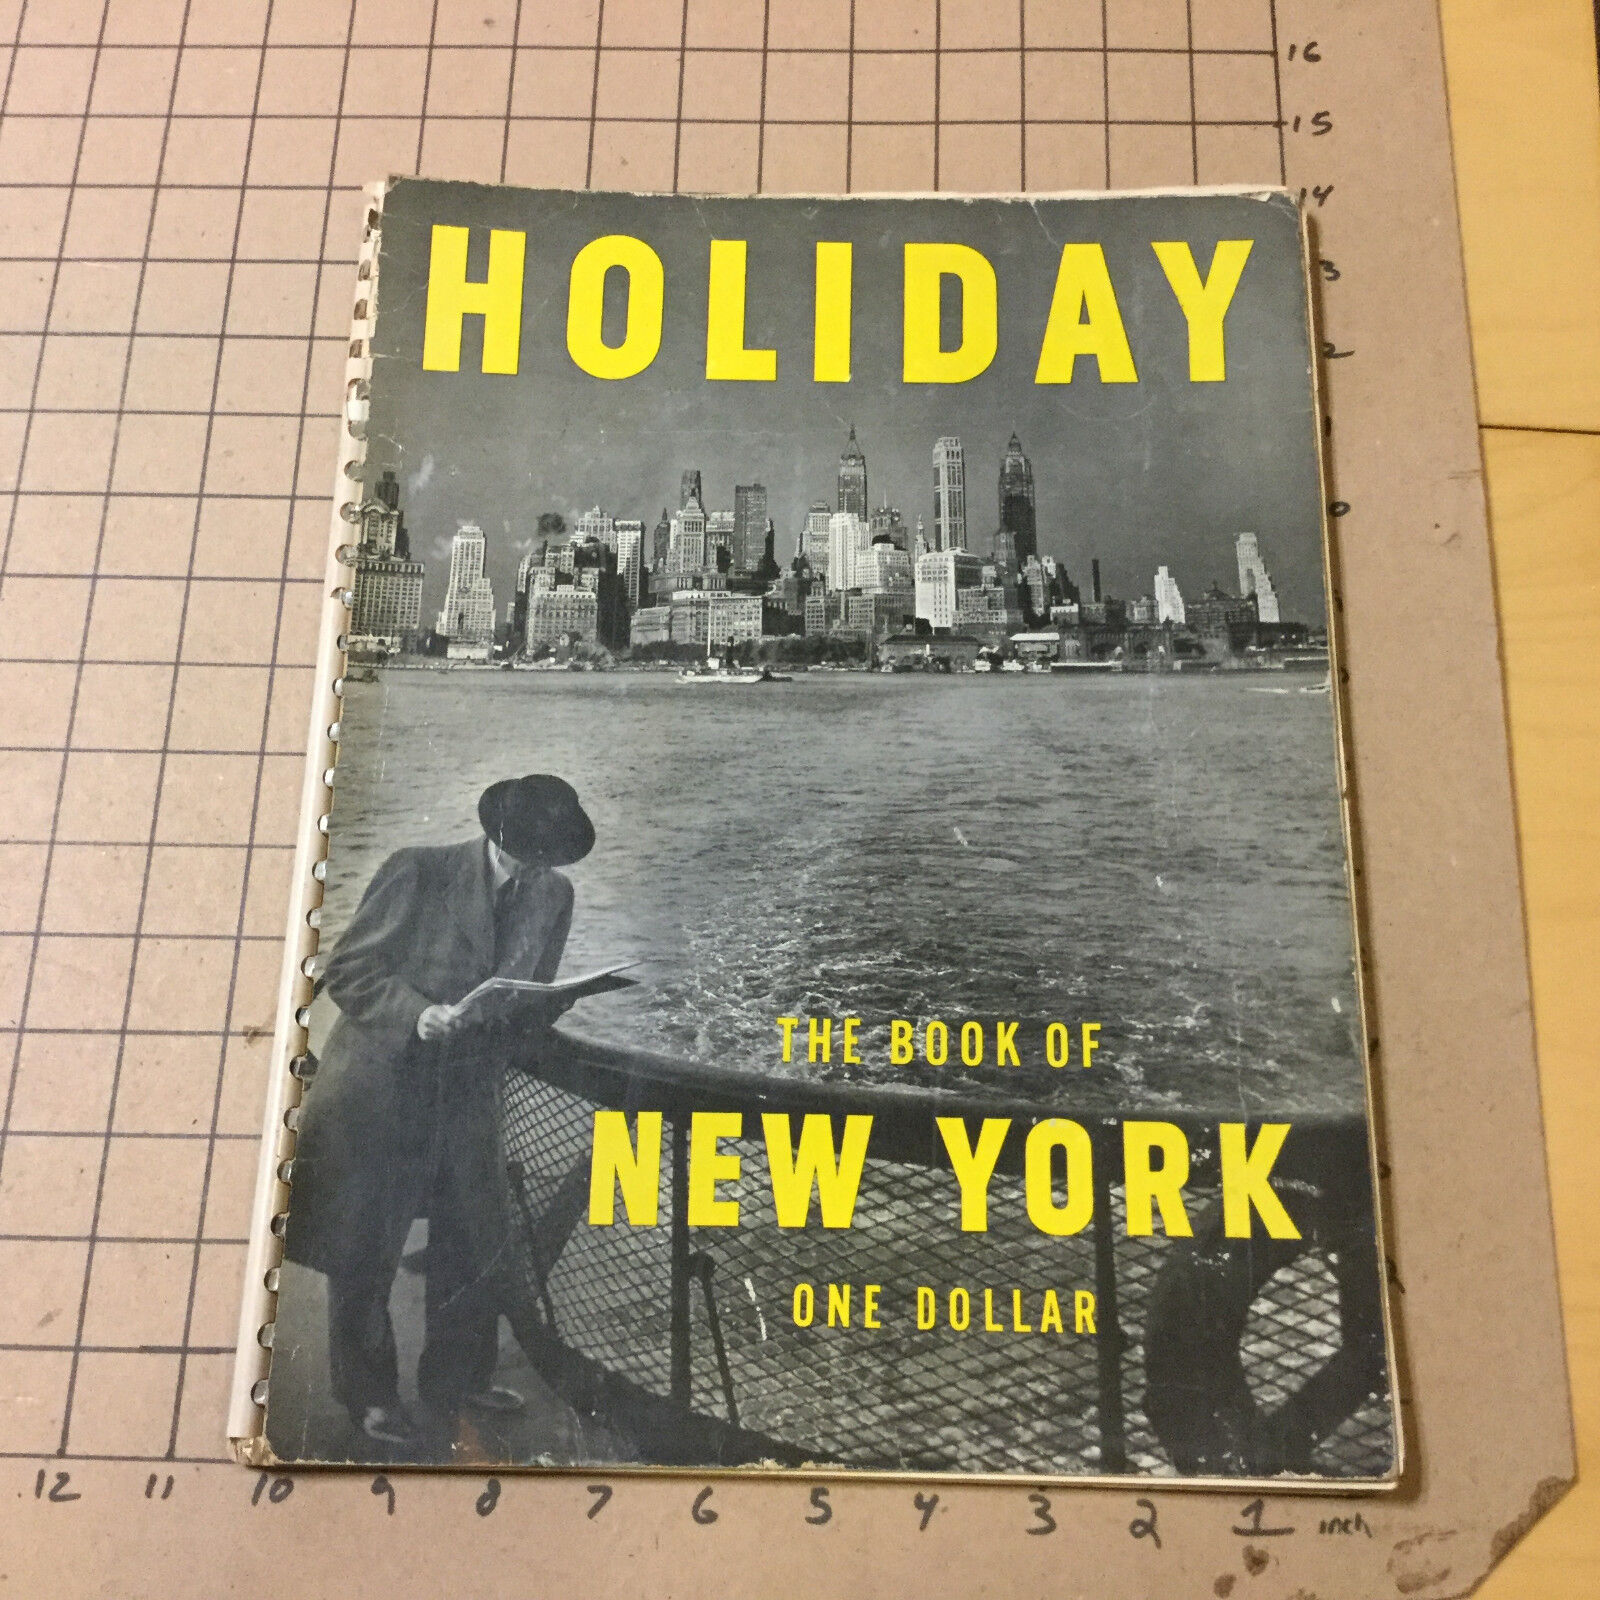 Original Vintage: 1949 HOLIDAY - The Book of NEW YORK - 88pgs spiral bound